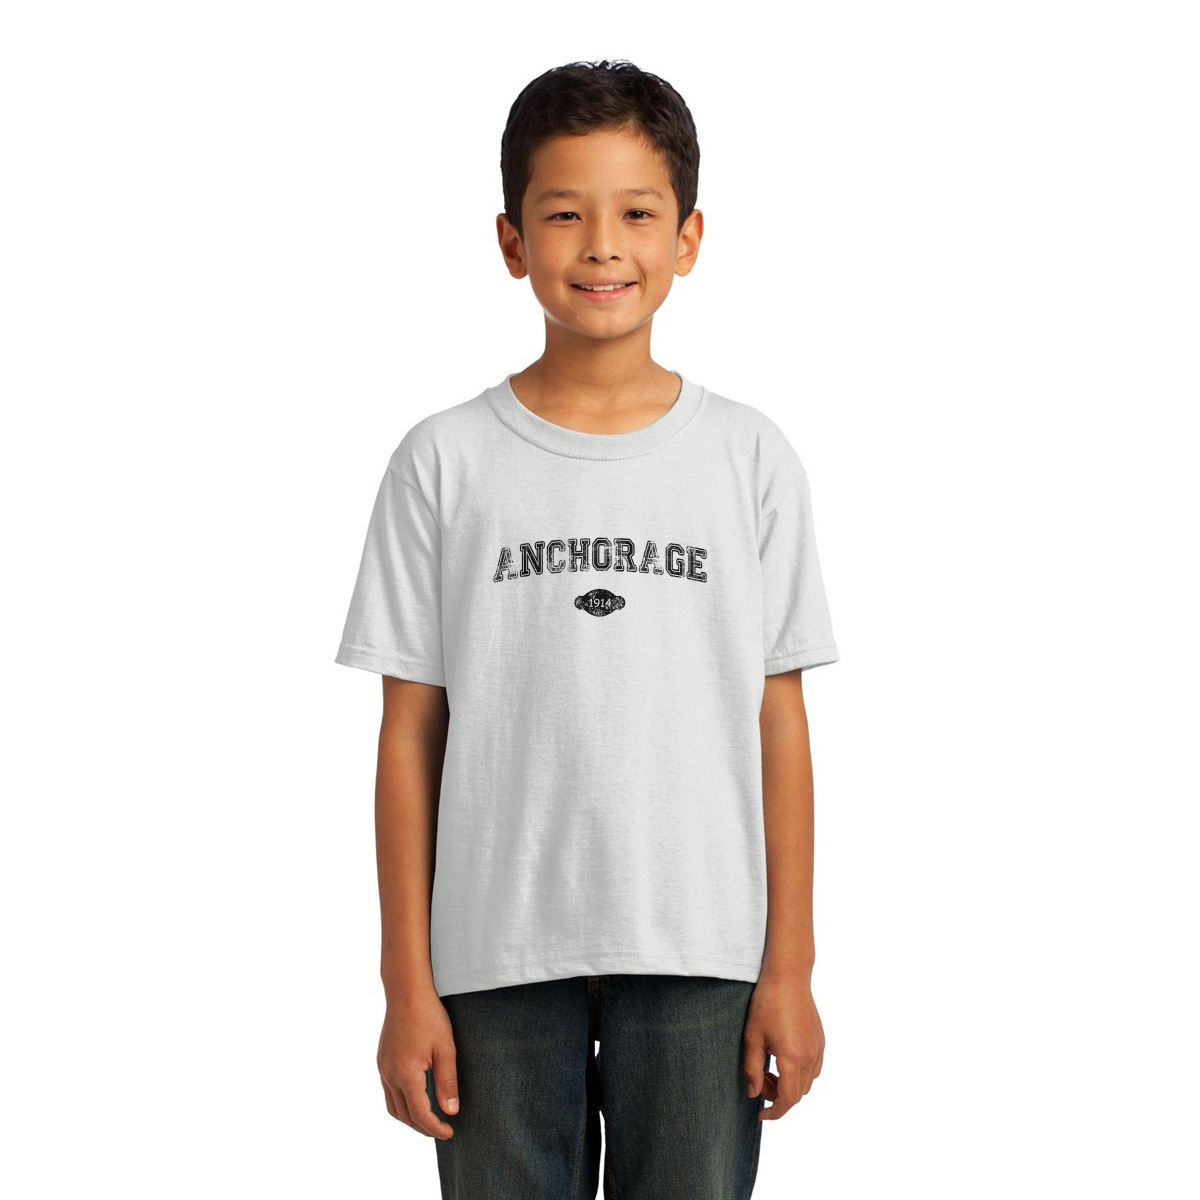 Anchorage 1914 Represent Toddler T-shirt | White